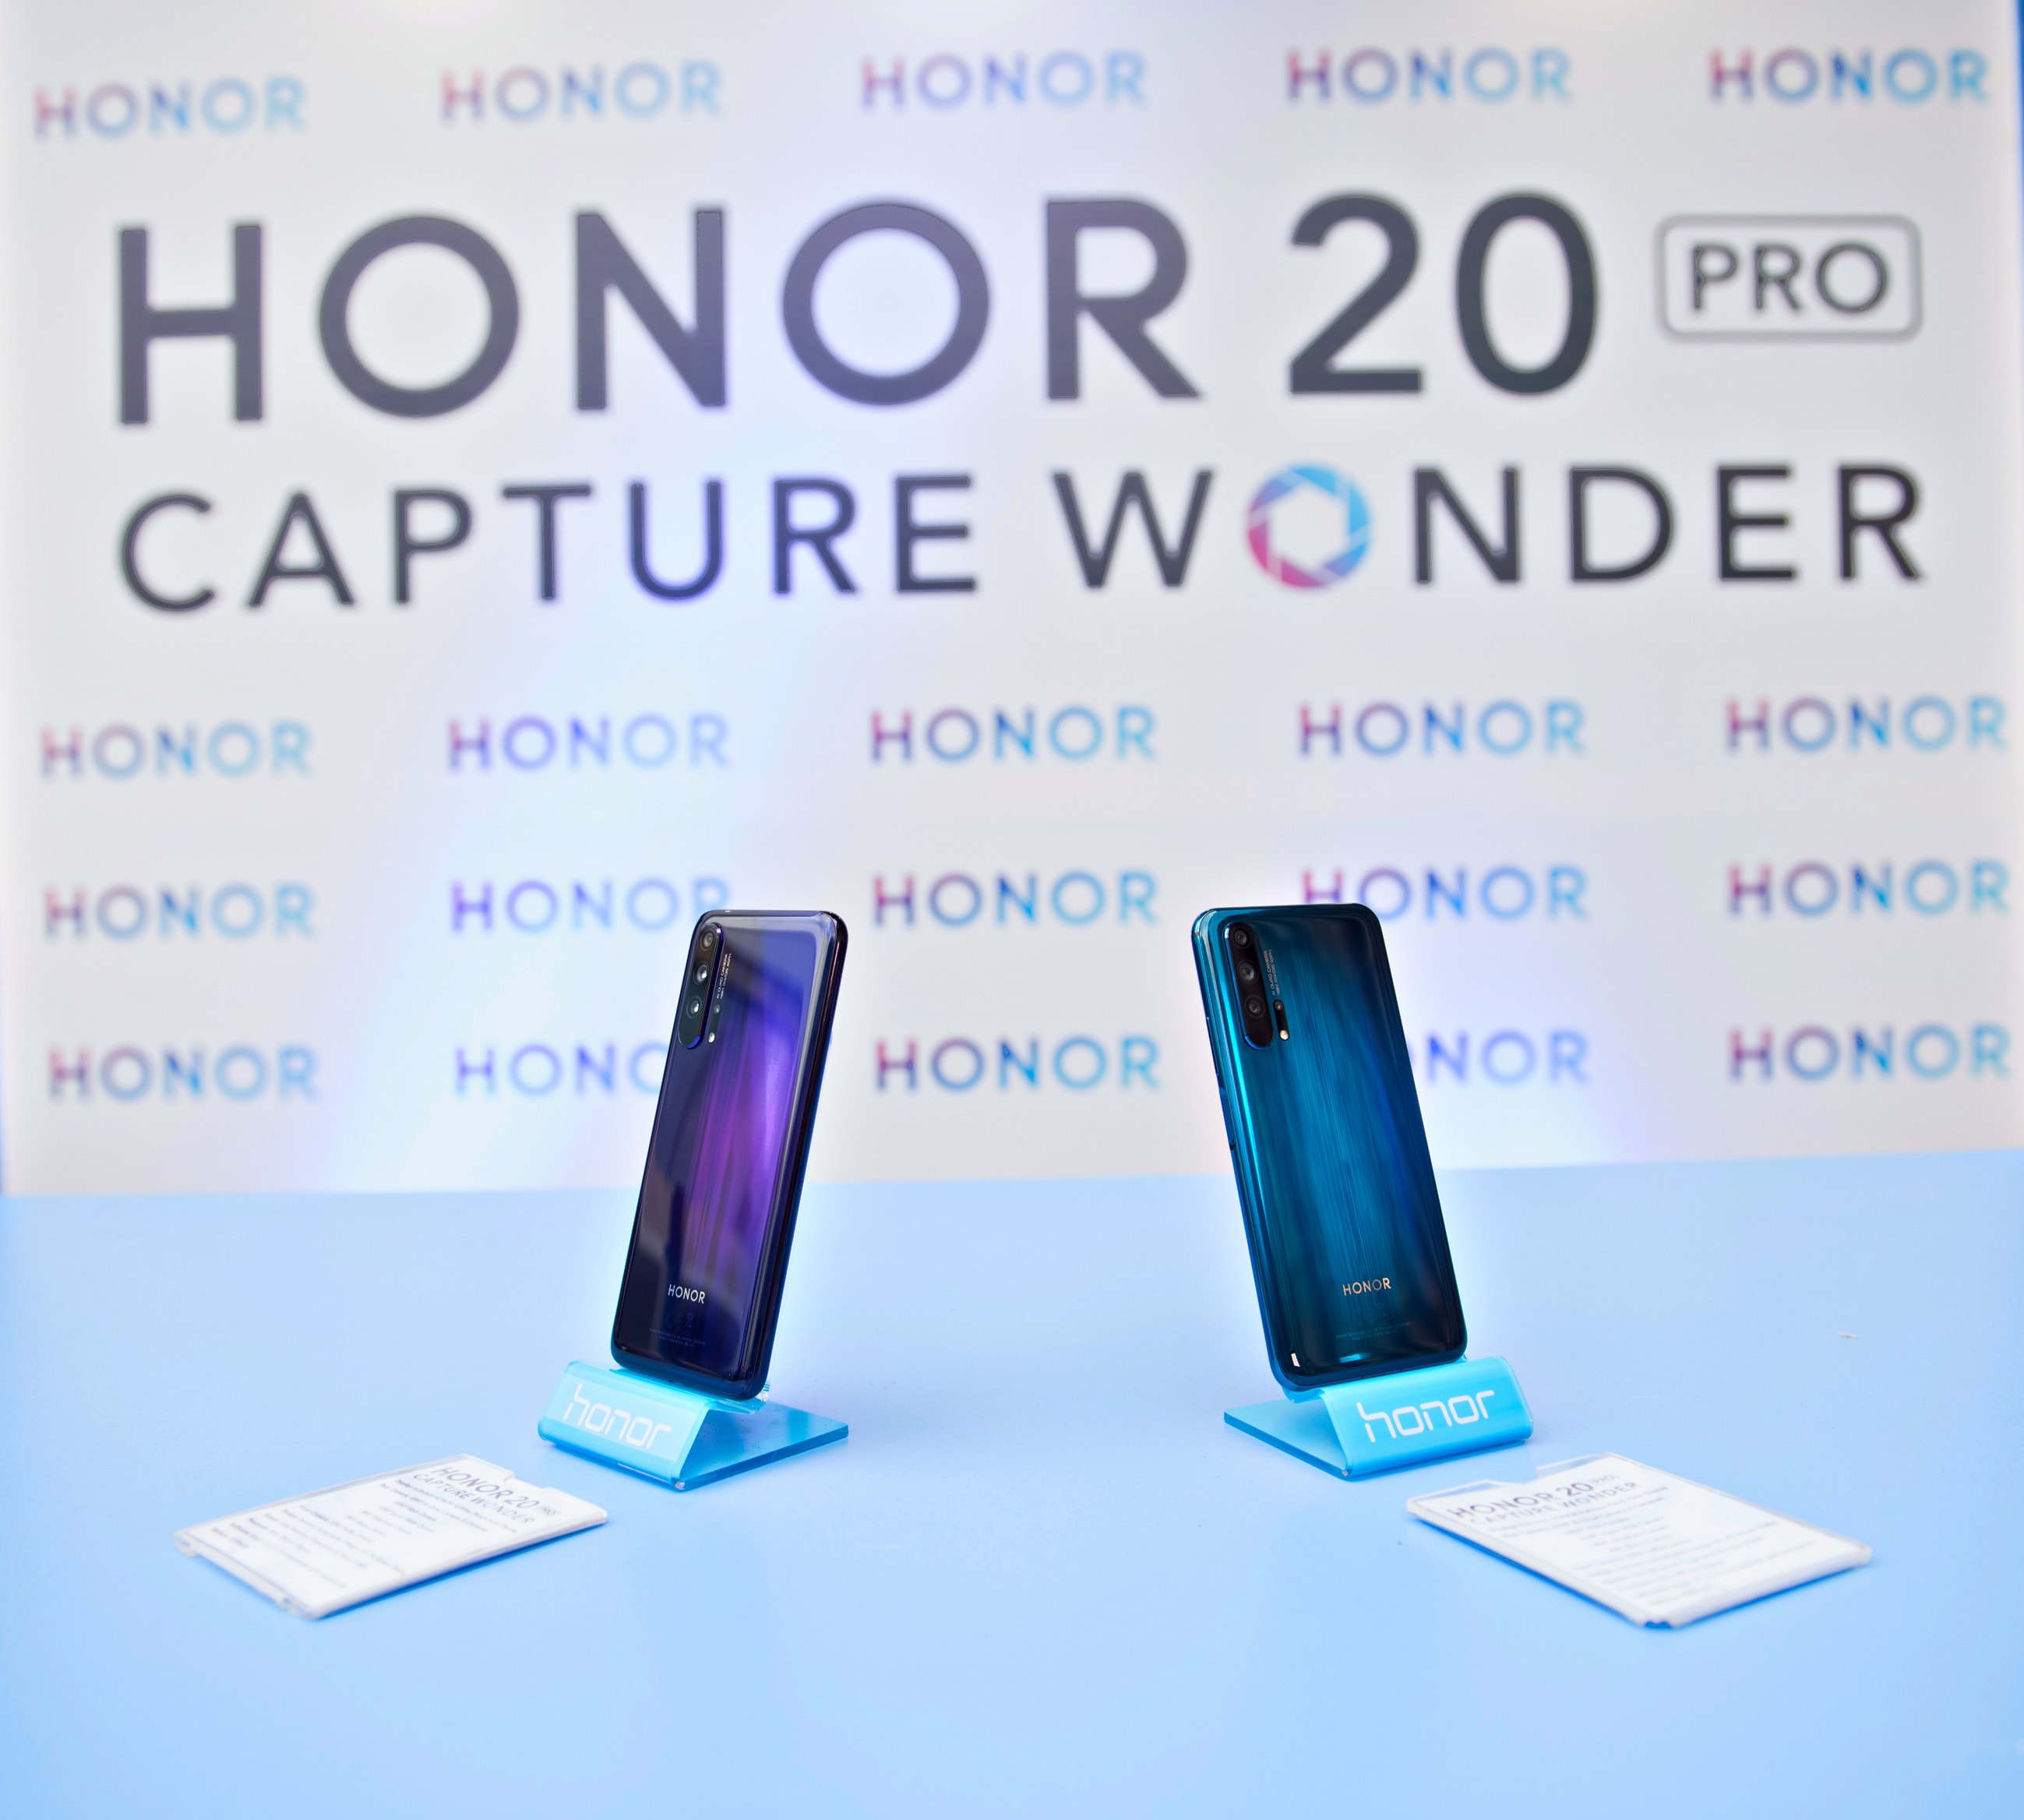 HONOR unveils flagship smartphone HONOR 20 Pro Now available for pre